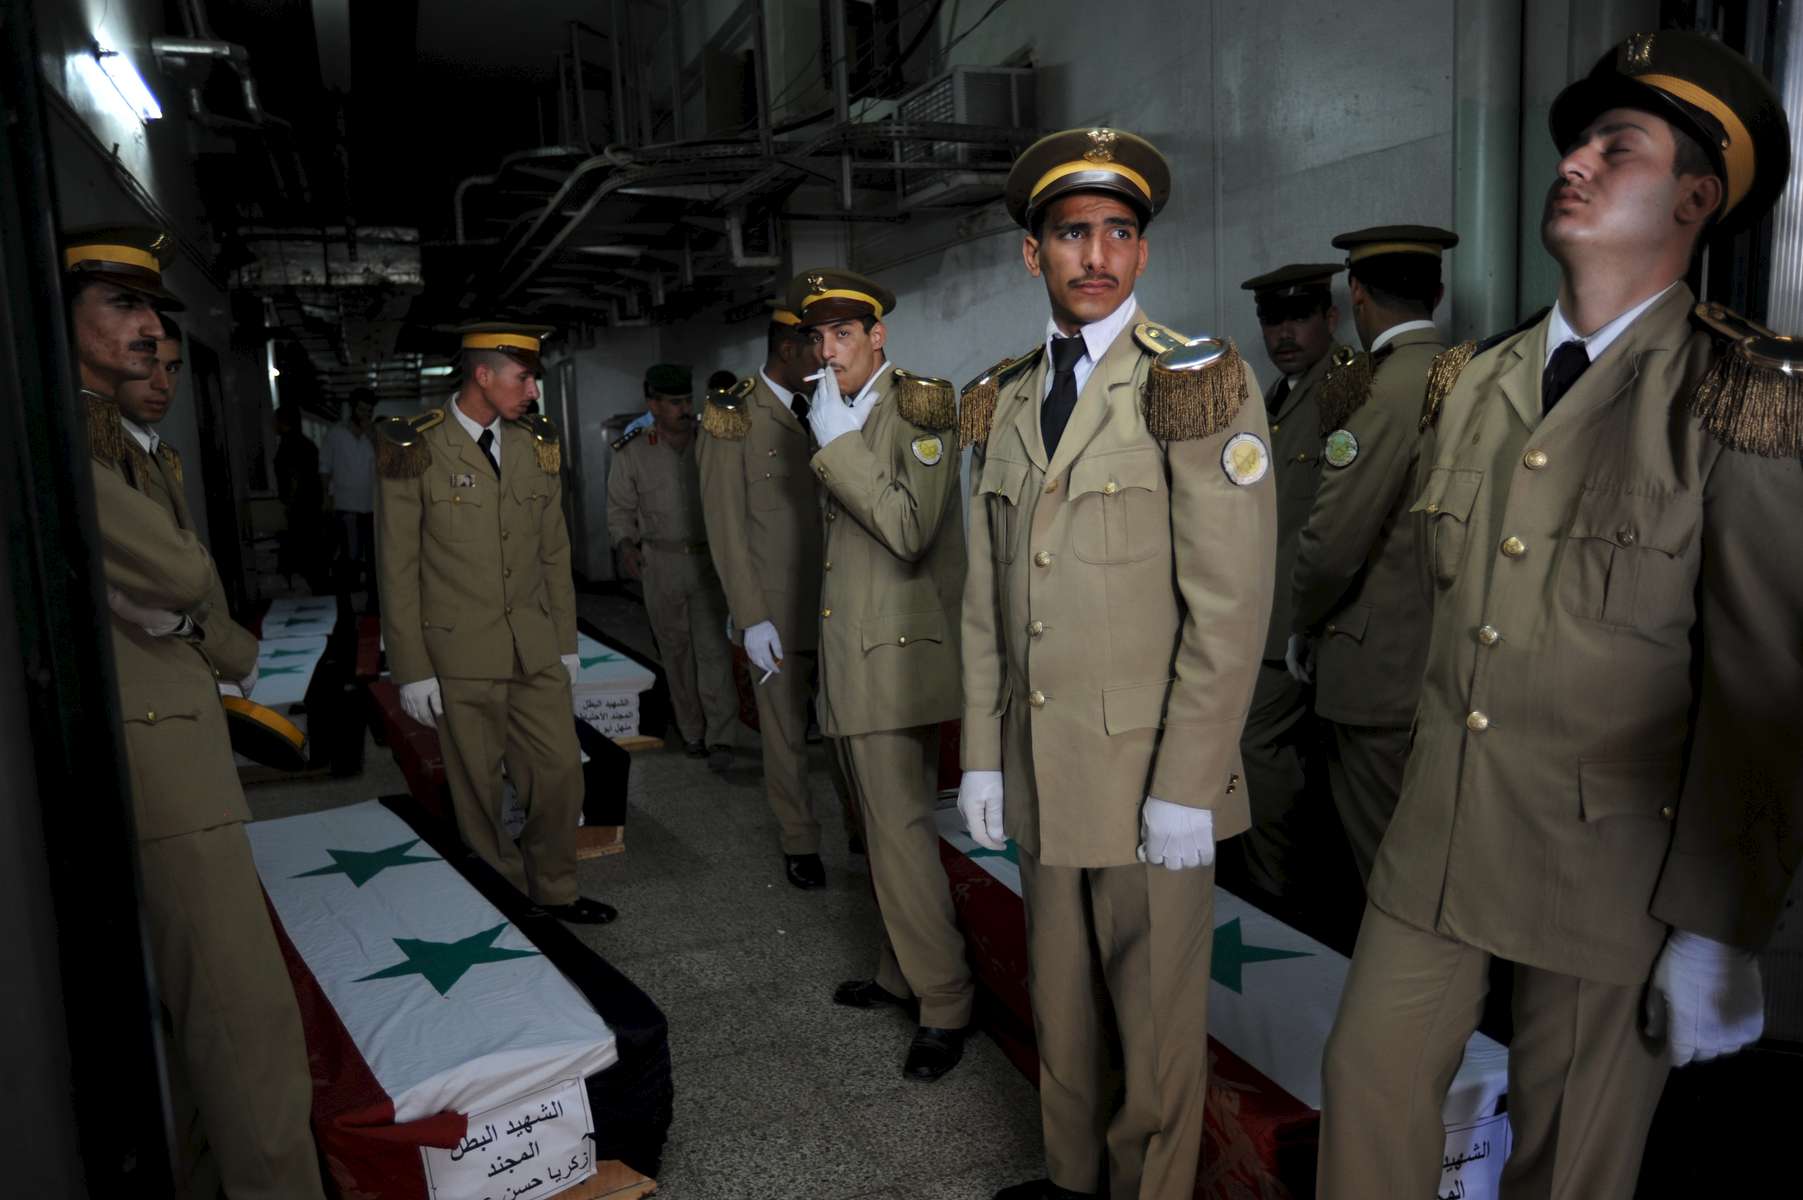 The Syrian army held funeral services for 42 soldiers at the Tishreen Military hospital on Saturday June 23, 2012. Another eight remained in the morgue. In recent weeks 100 Syrian soldiers on average are being killed in the the conflict. 